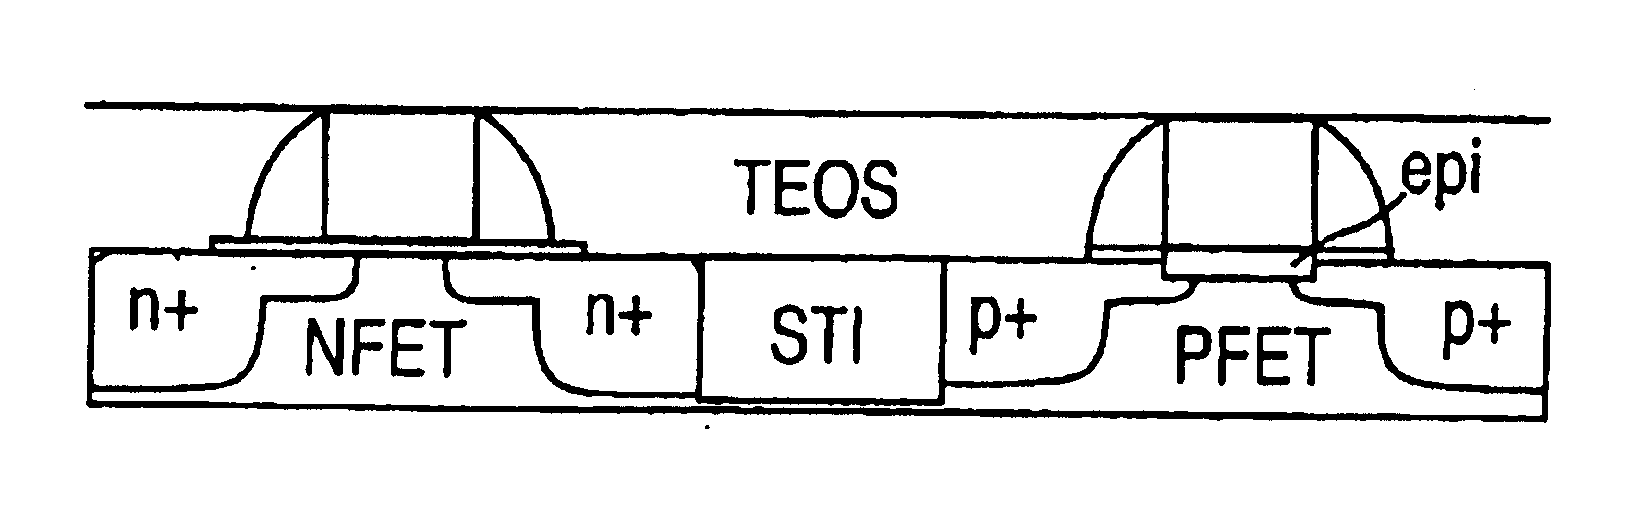 High performance CMOS device structure with mid-gap metal gate